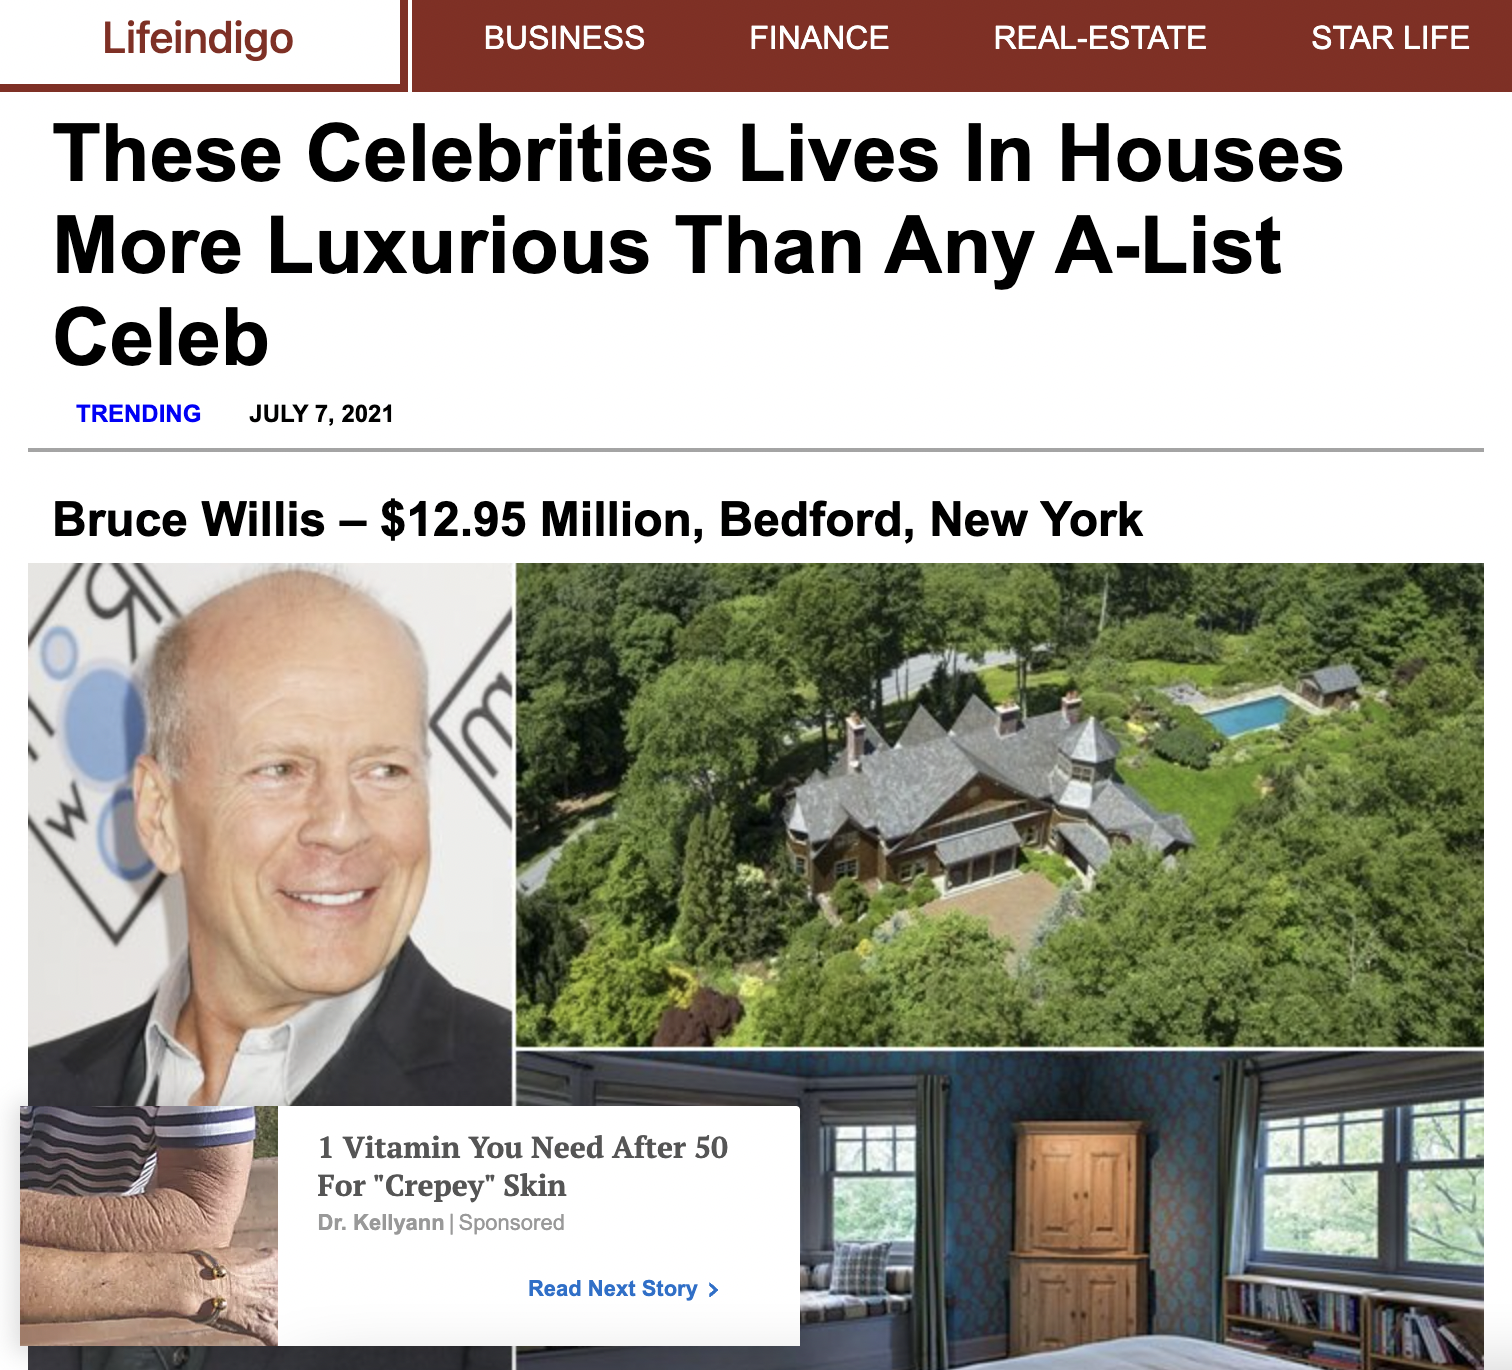 "These Celebrities Lives In Houses More Luxurious Than Any A-List Celeb" article